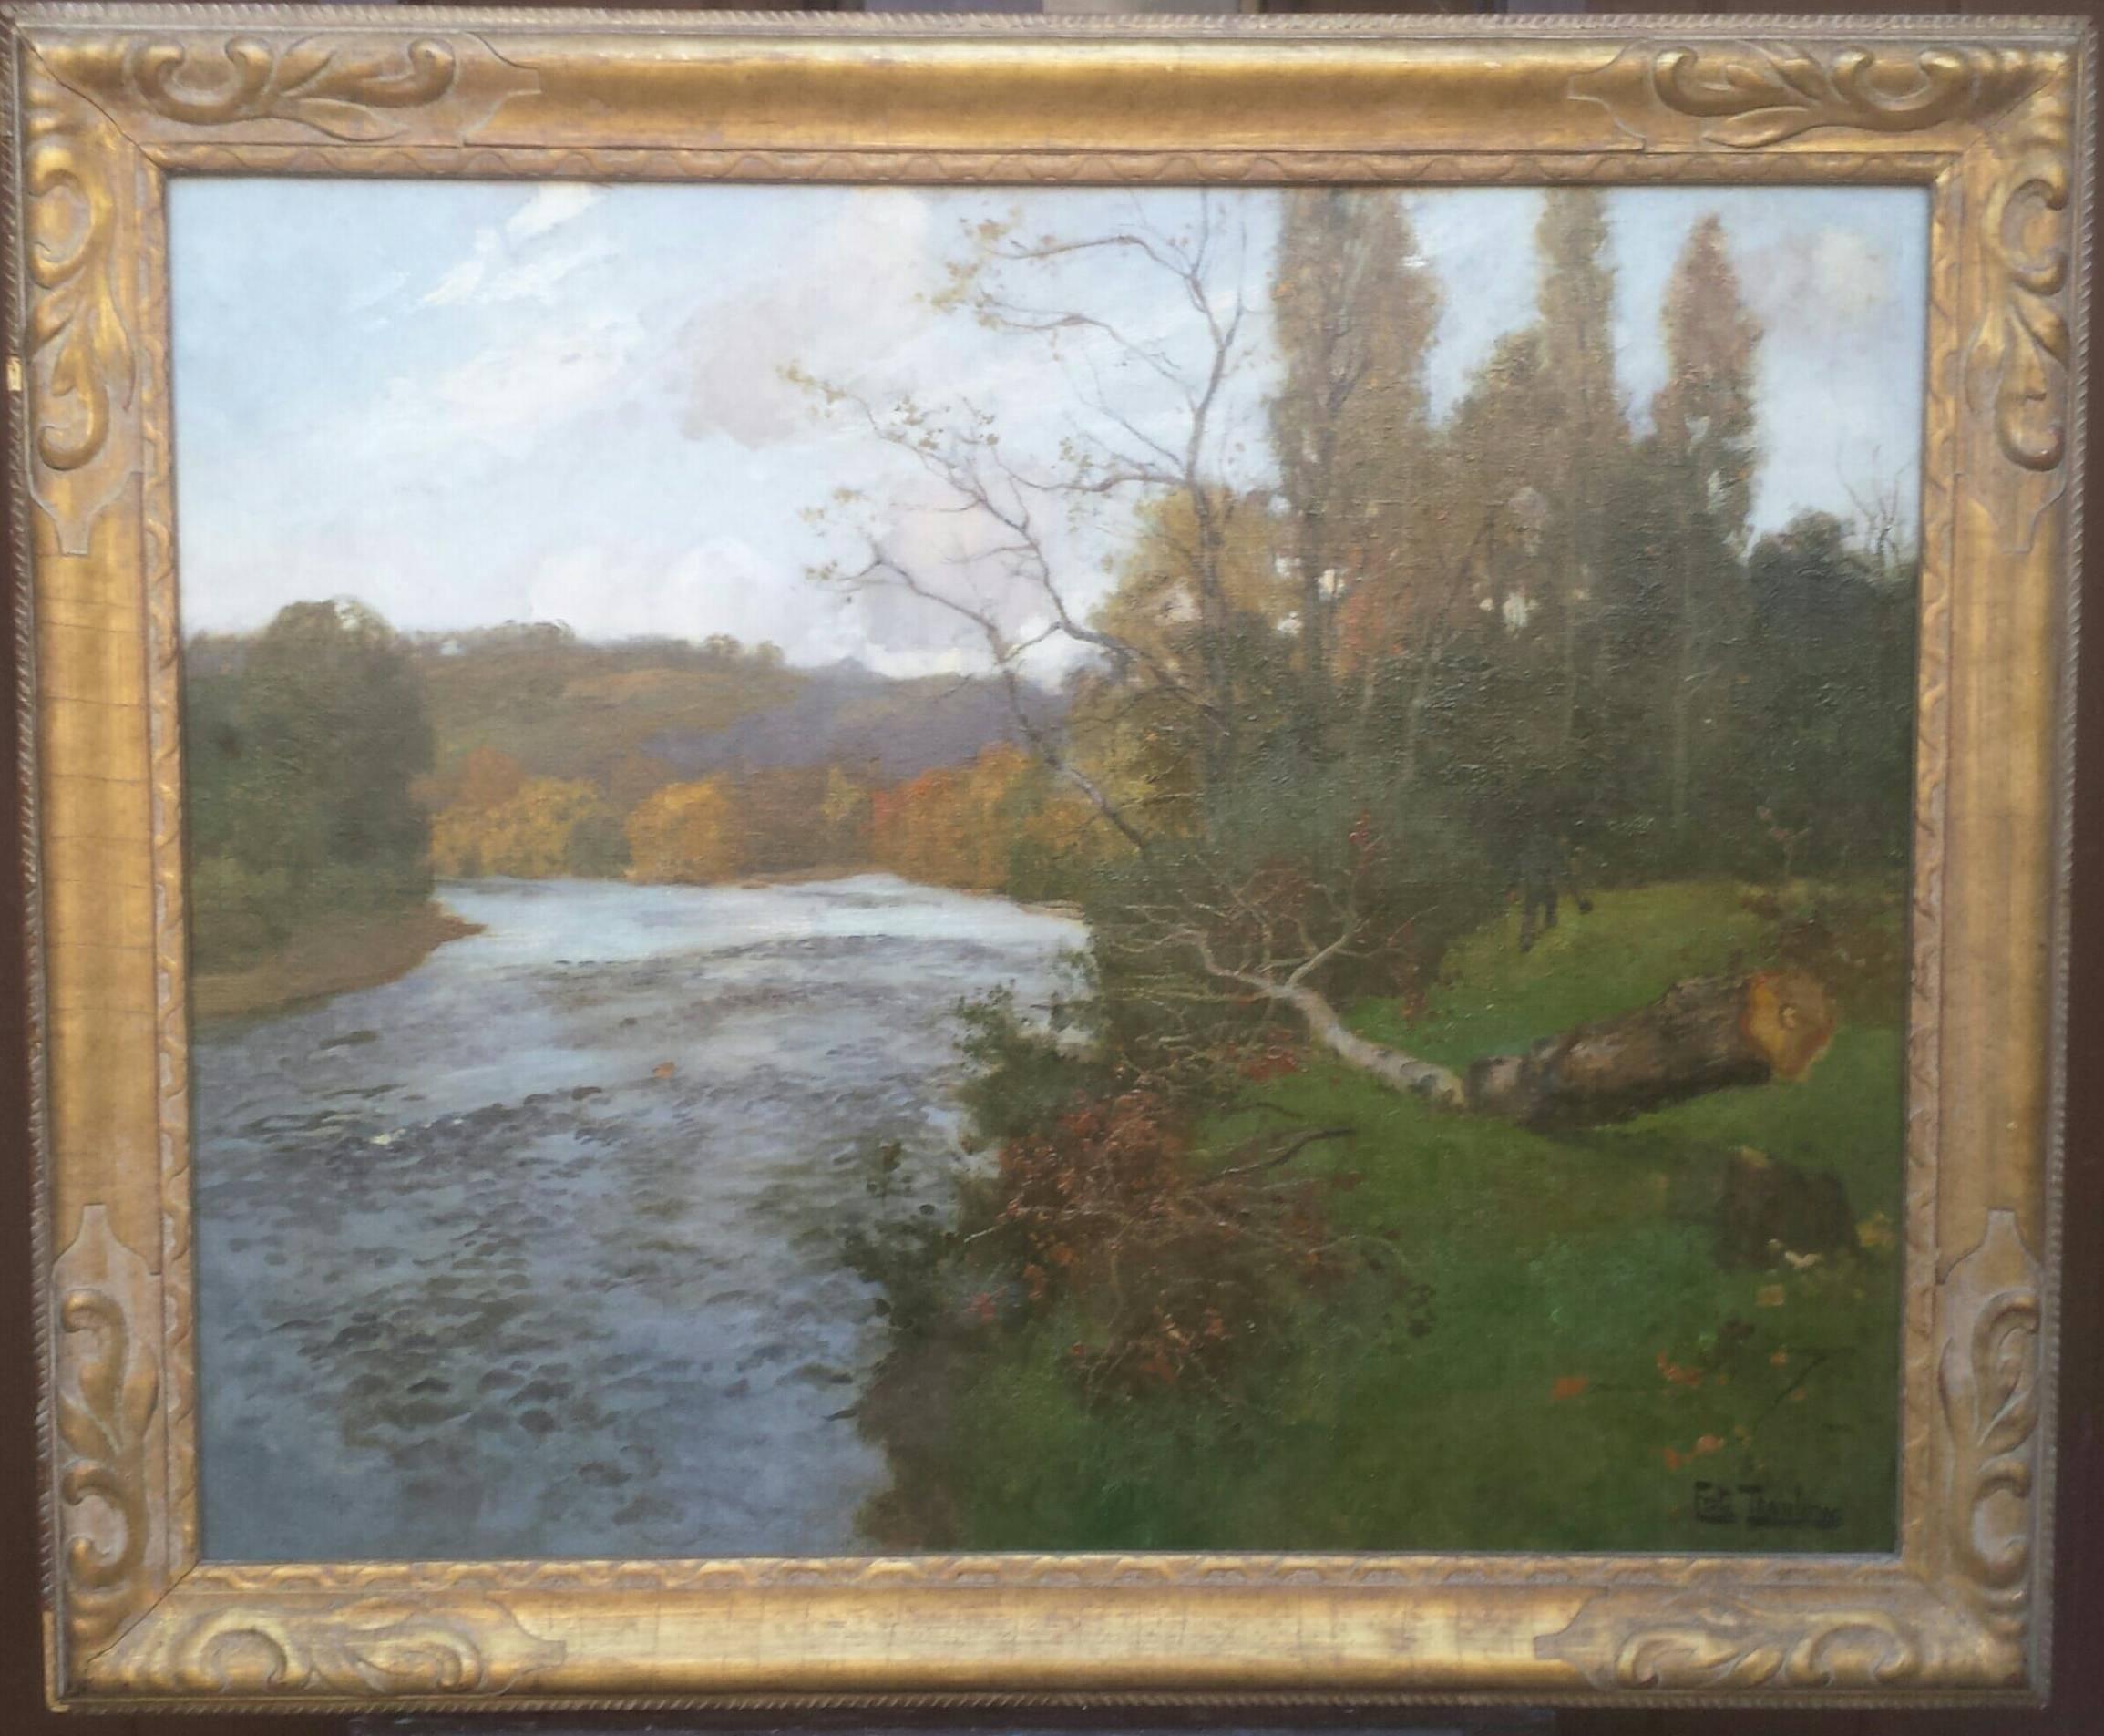 The Otta River, Norway - Painting by Frits Thaulow